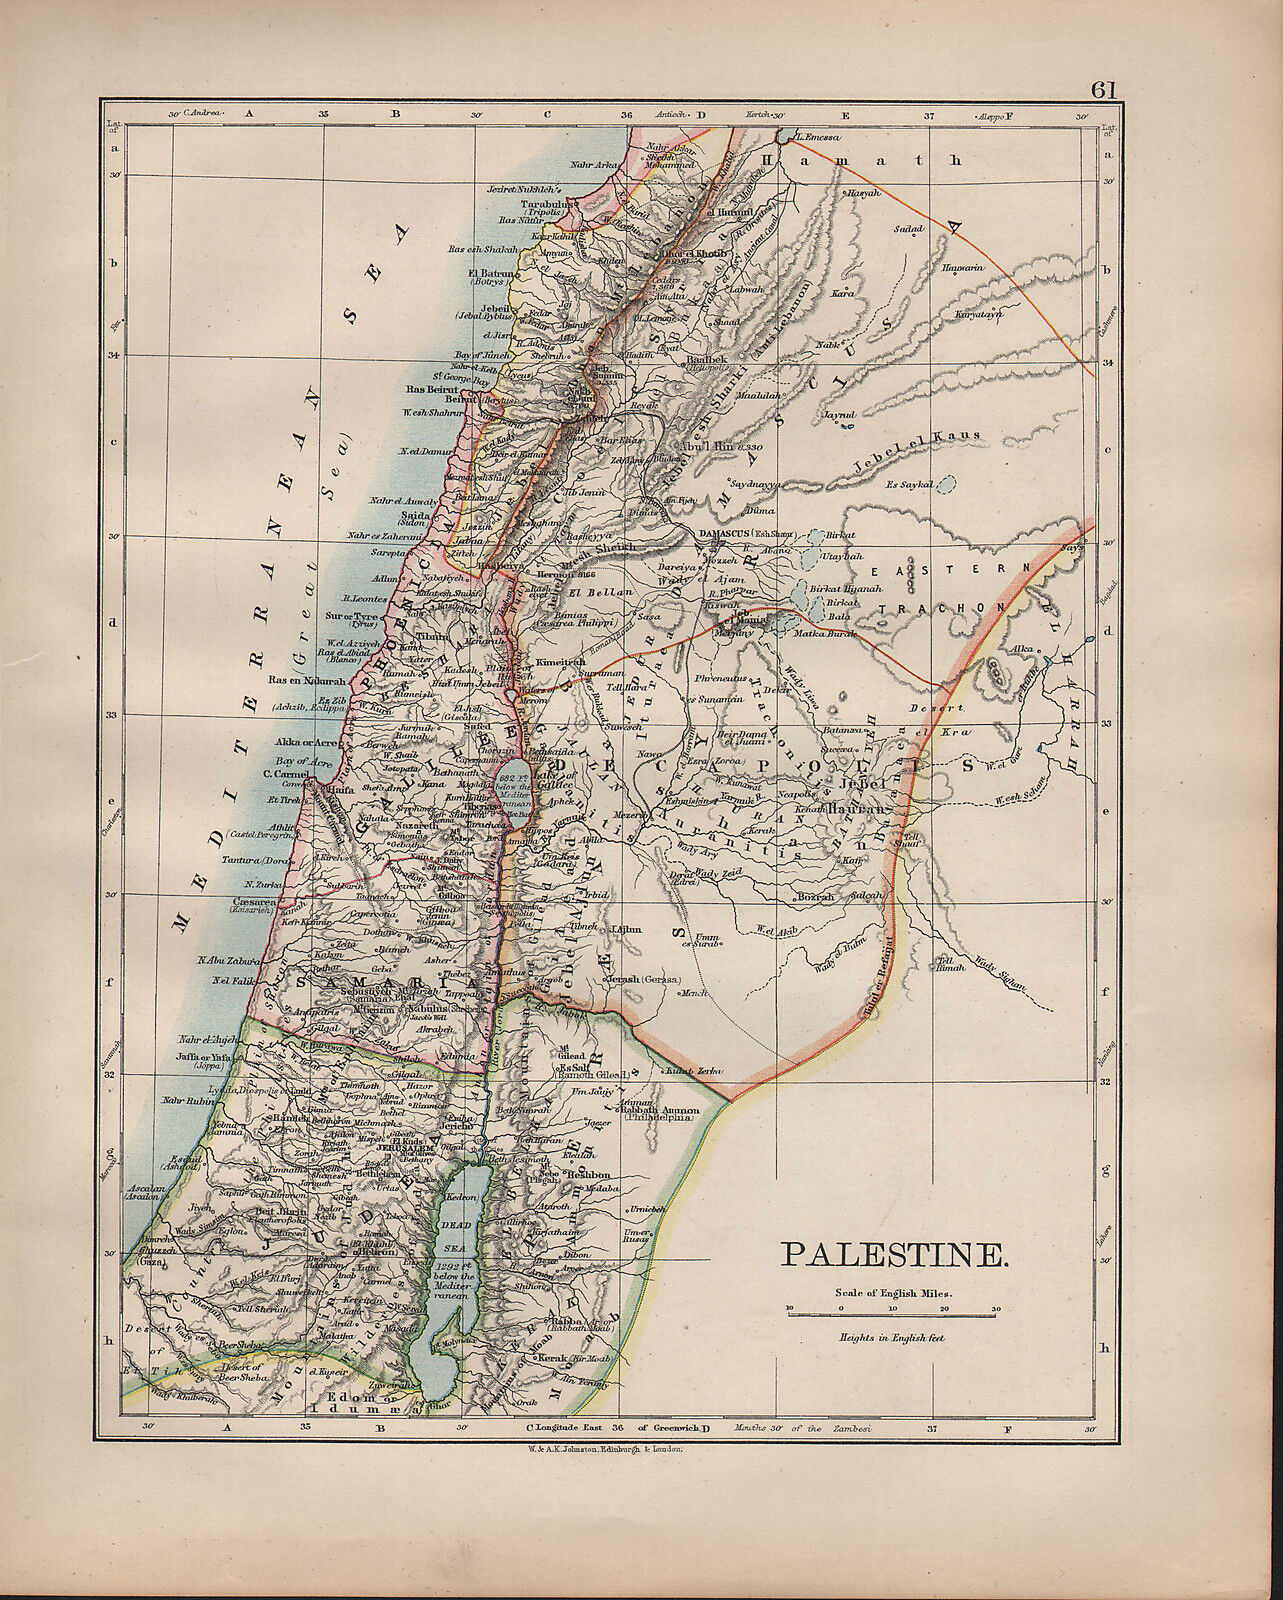 historical map of Palestine - from the river to the sea